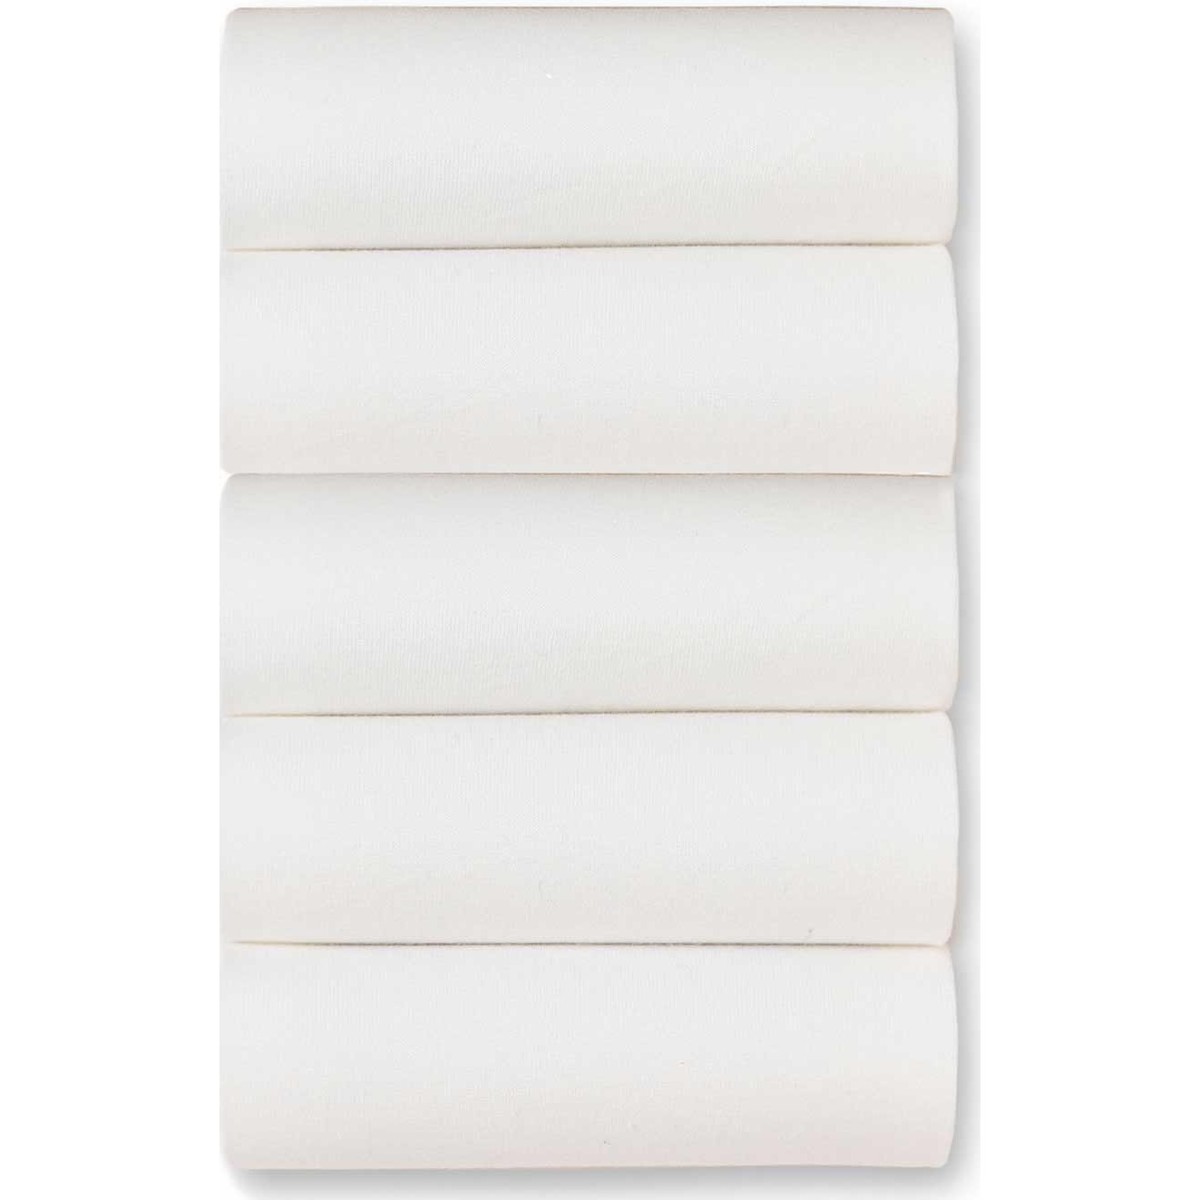 Daxon Blanc by - Lot de 5 slips ouverts forme maxi yvRsYSC0